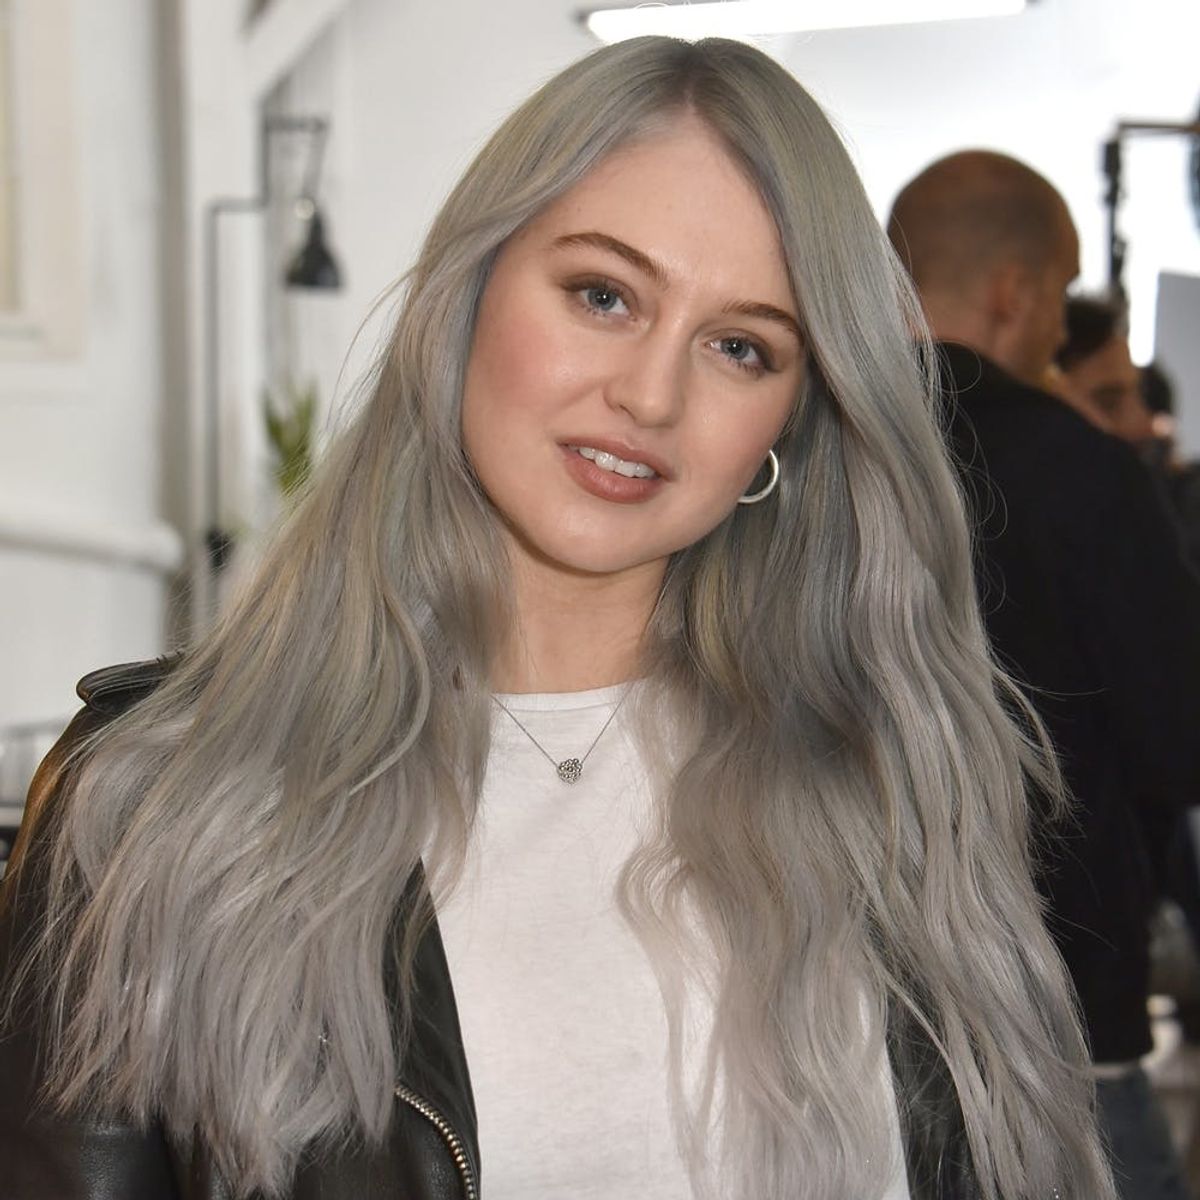 L’Oréal Paris Names Silver as the 2019 Hair Color of the Year